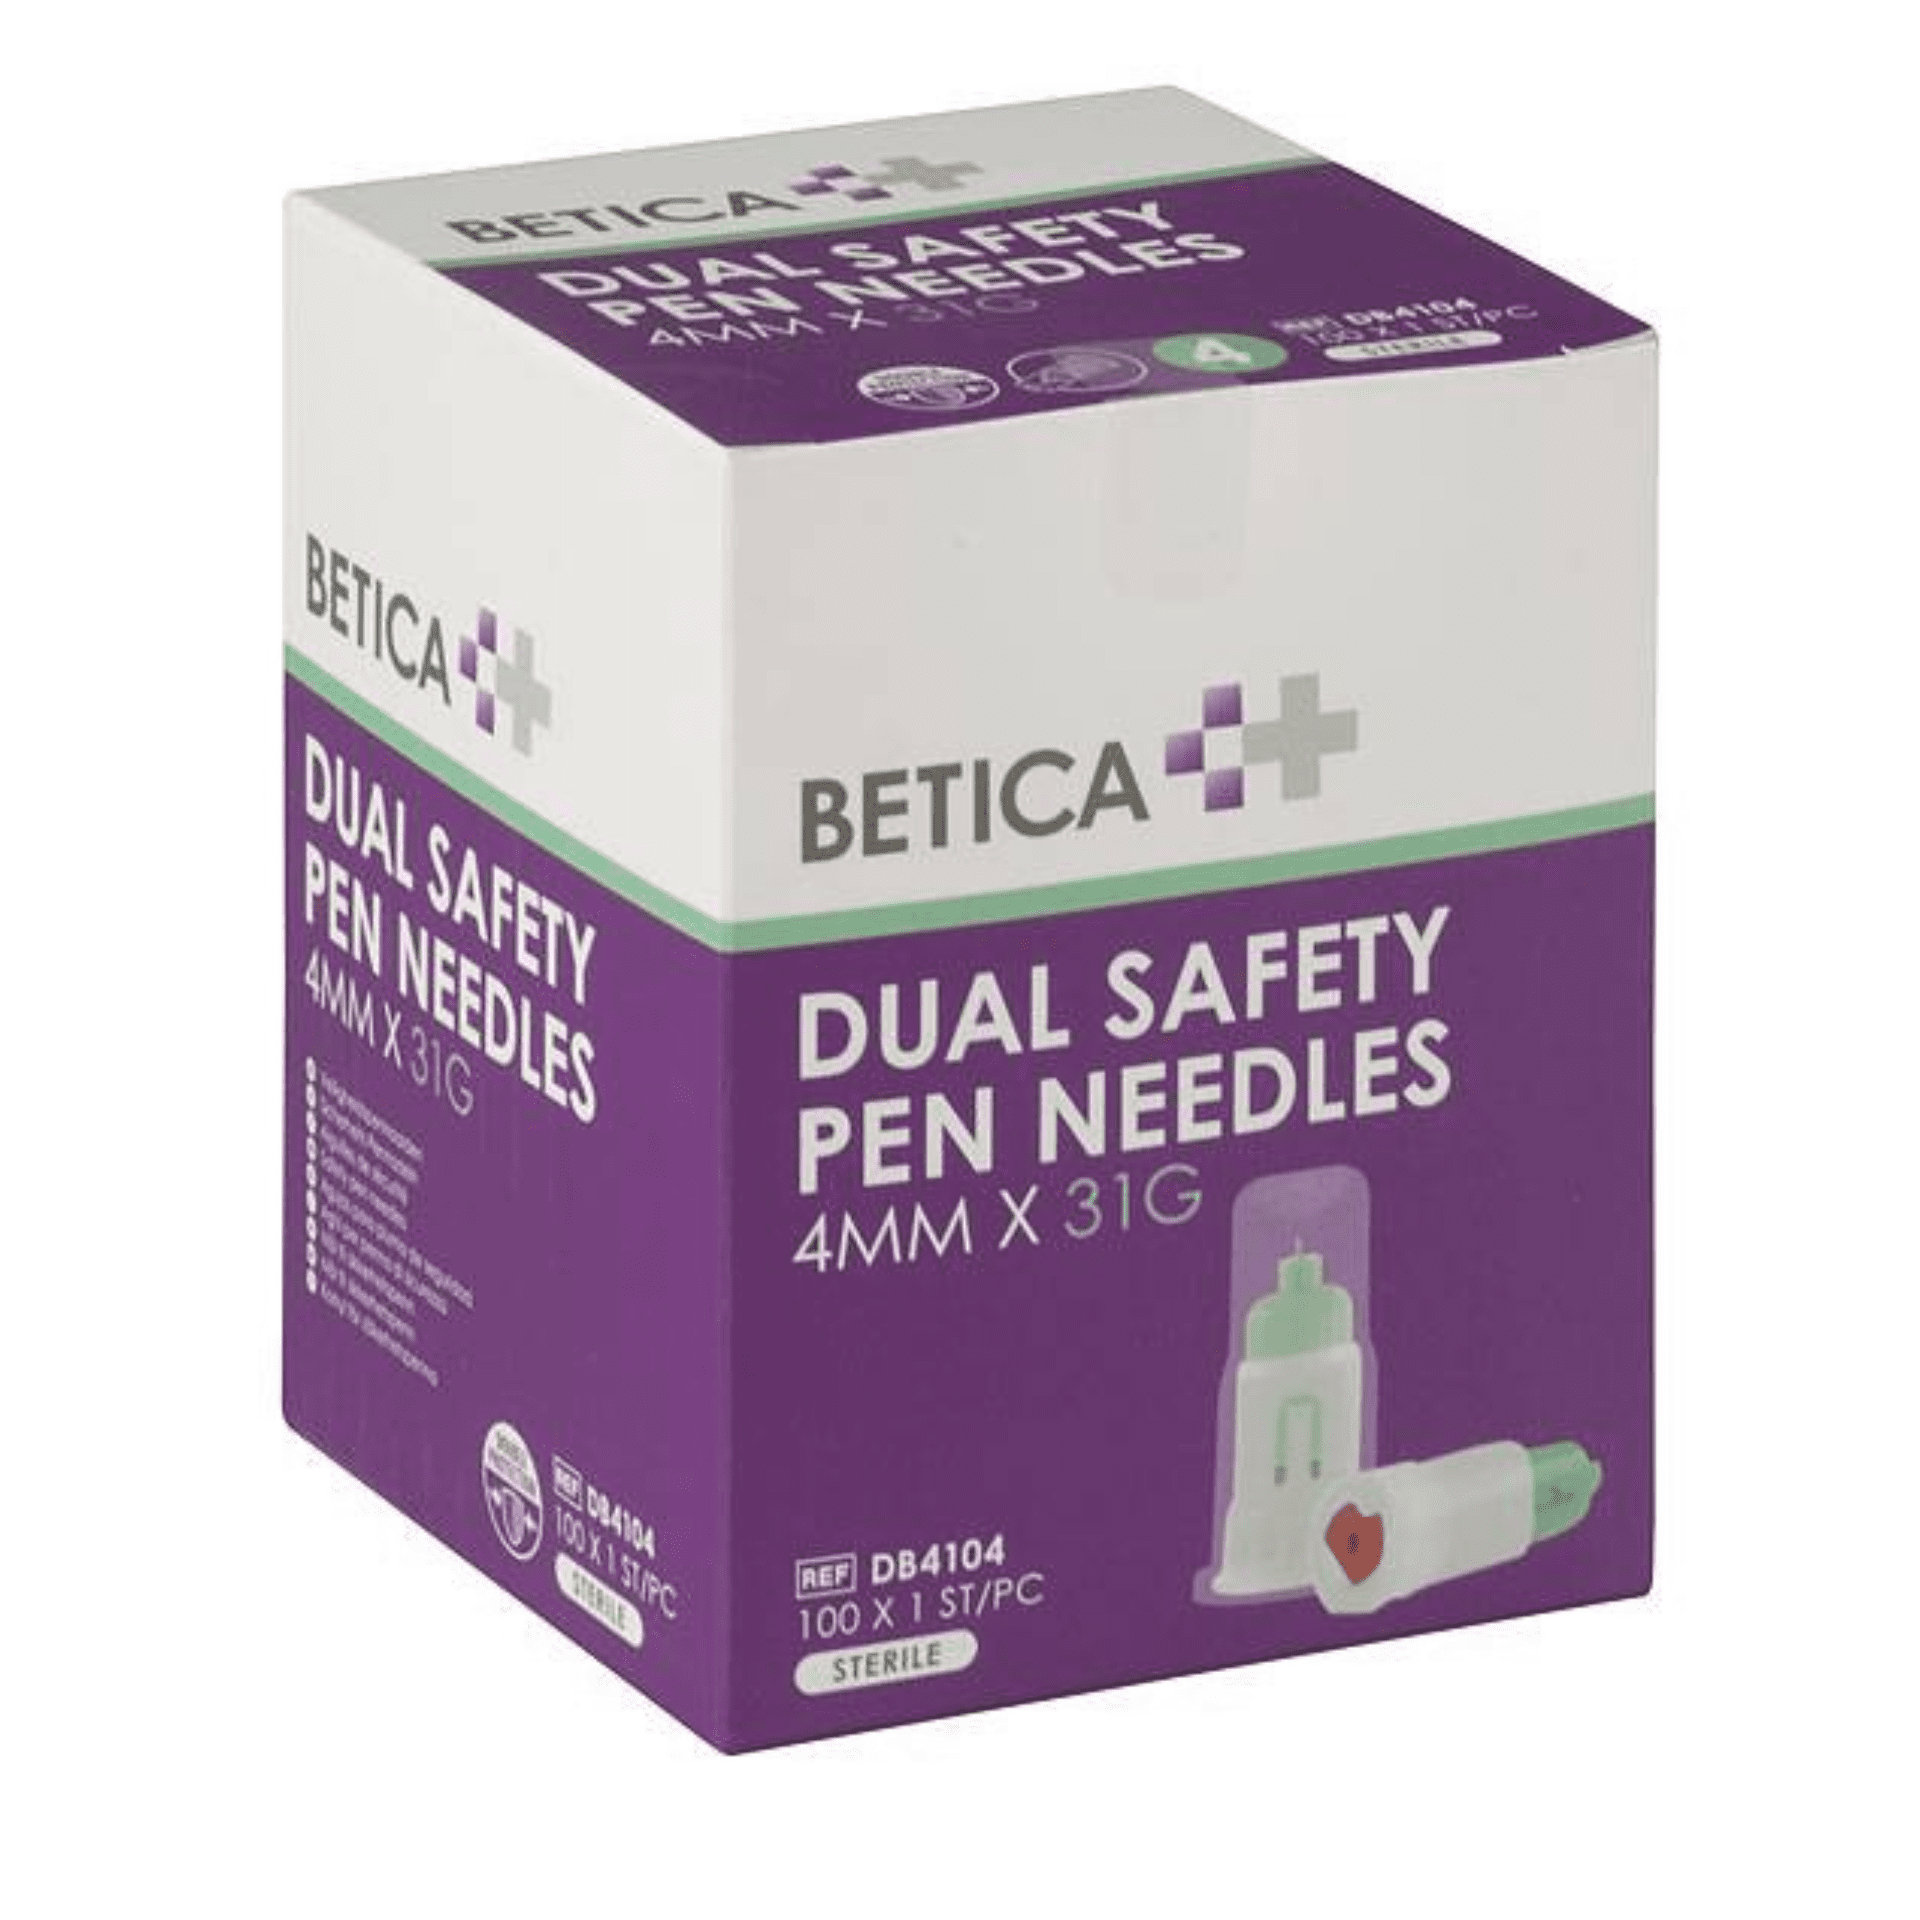 Betica Dual Safety Pen Needles 4 mm 31 g 